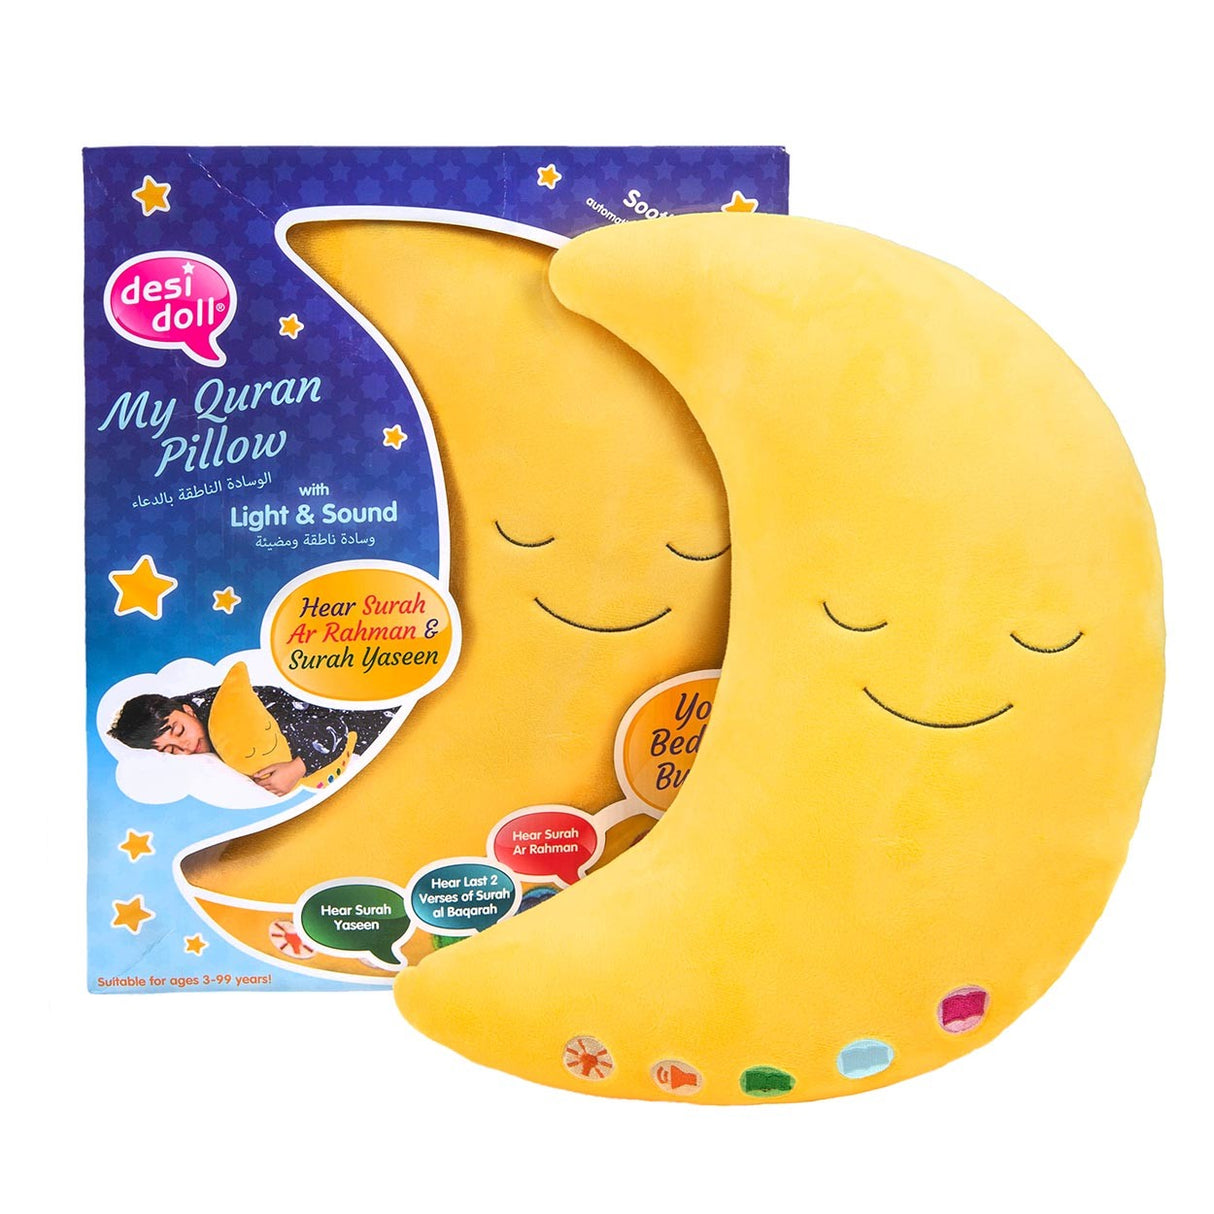 My Quran Moon Pillow with Light & Sound